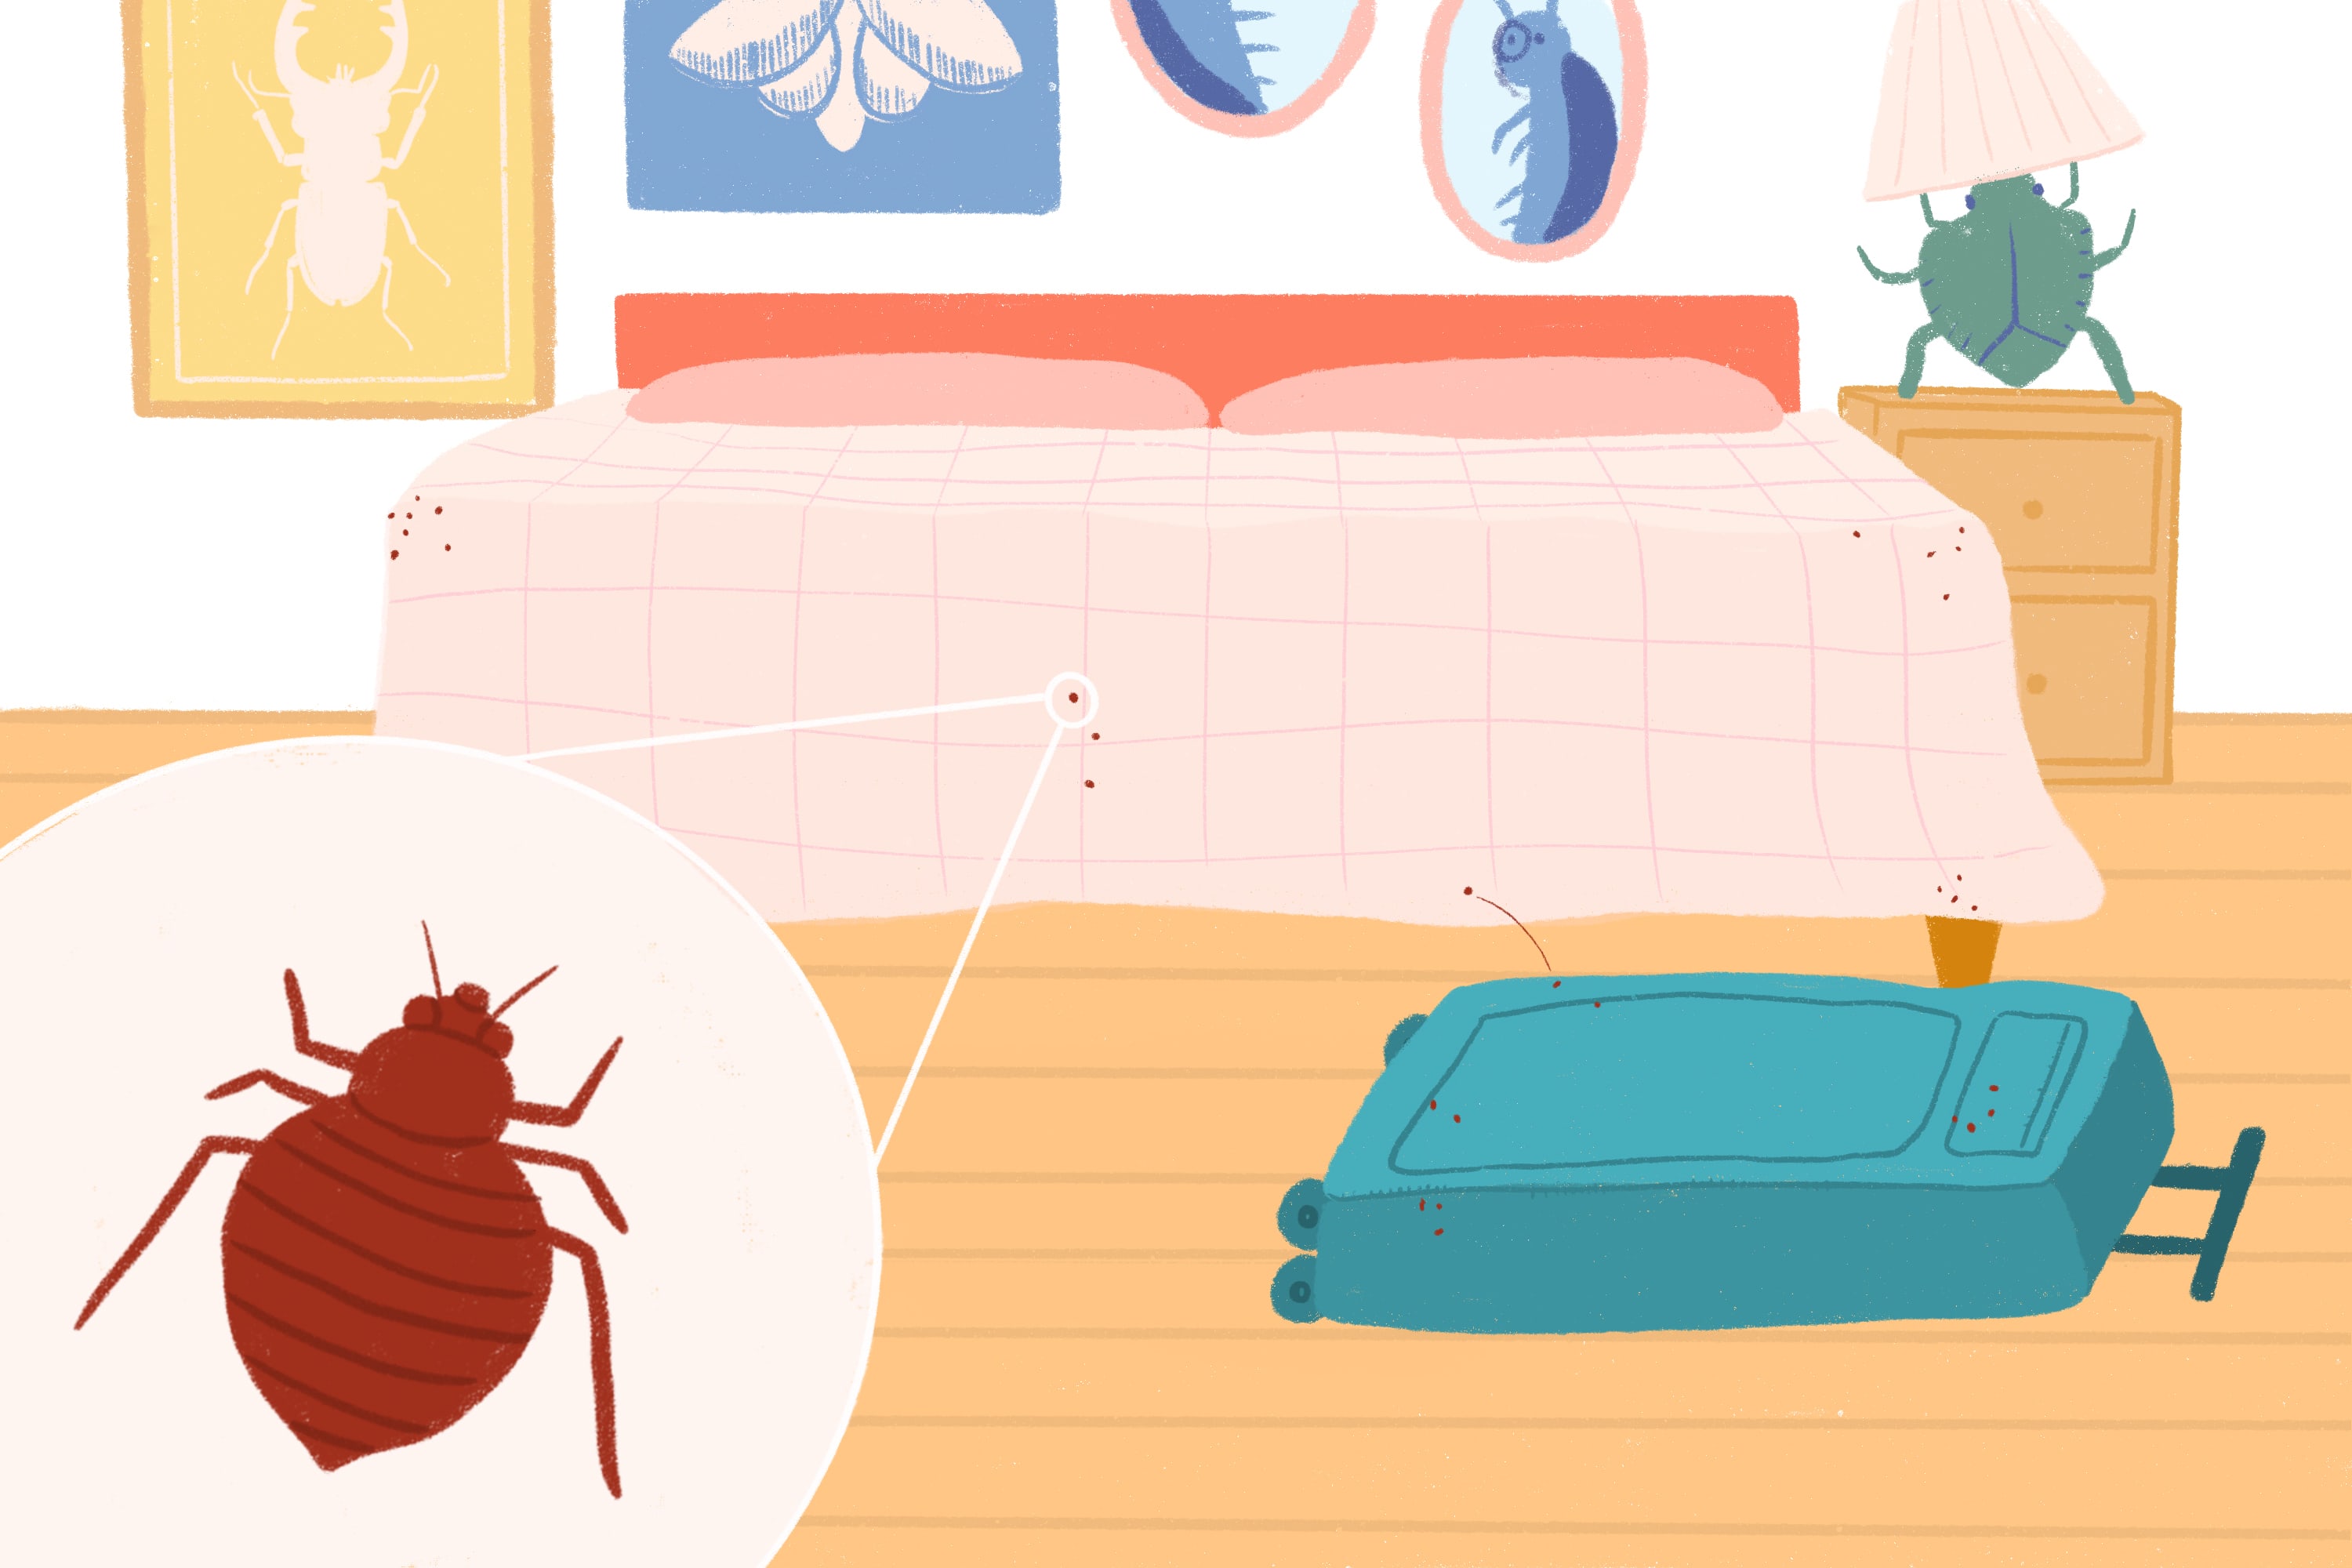 How to Prevent Bed Bugs With 3 Items From Experts